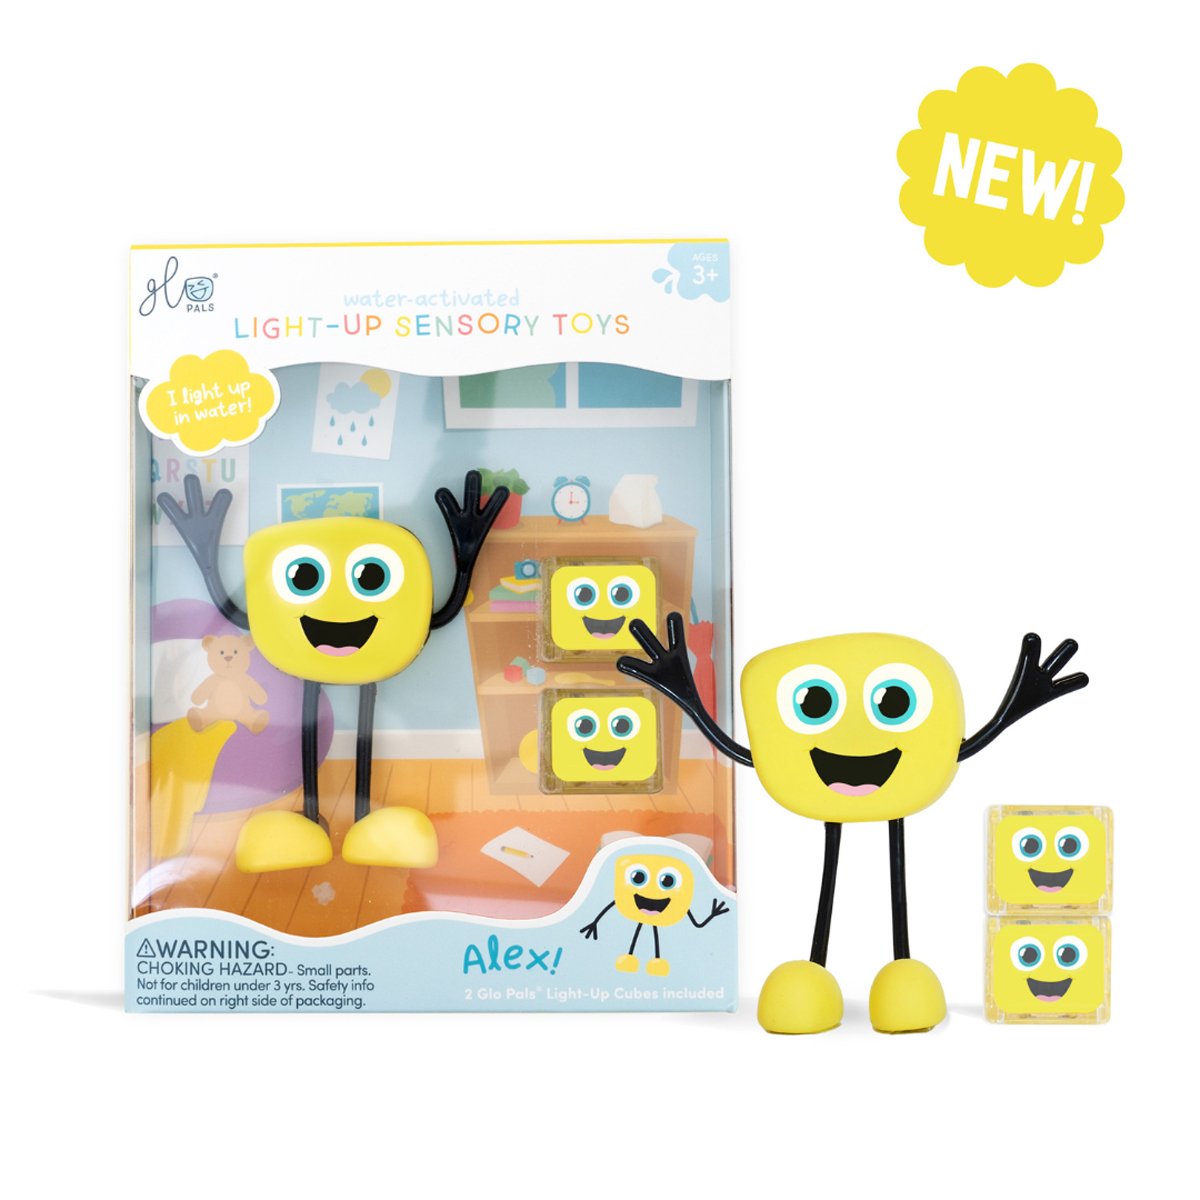 Glo Pals Character Yellow | Glo Pals